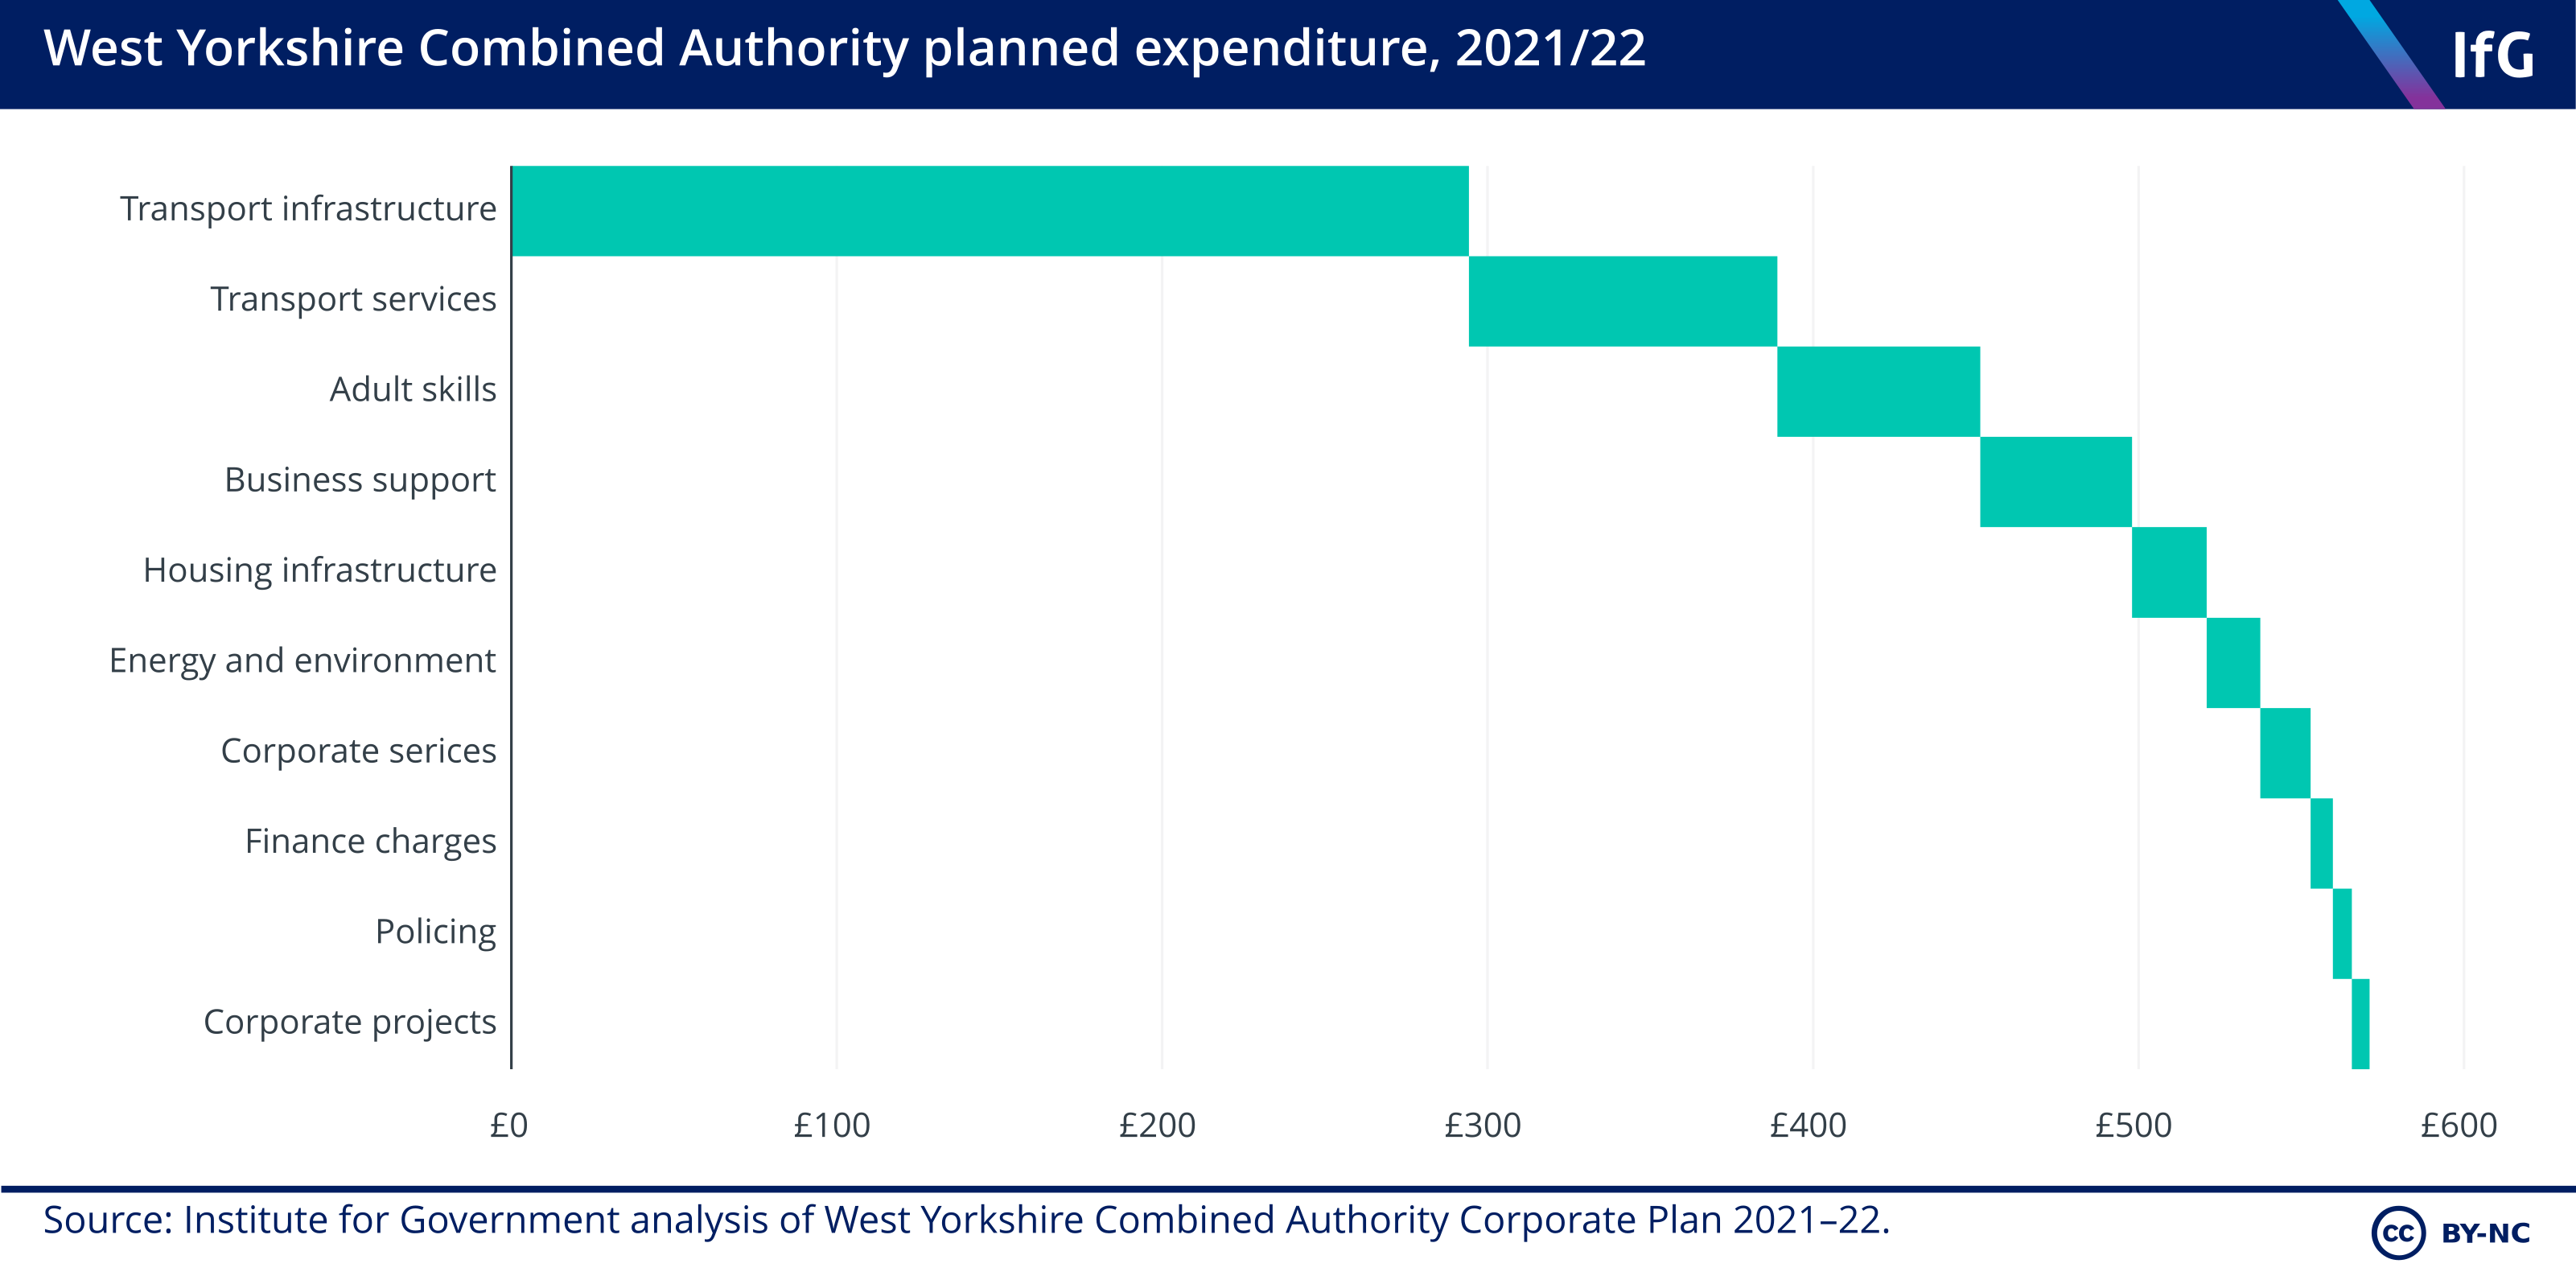 West Yorkshire Combined Authority planned expenditure, 2021/22